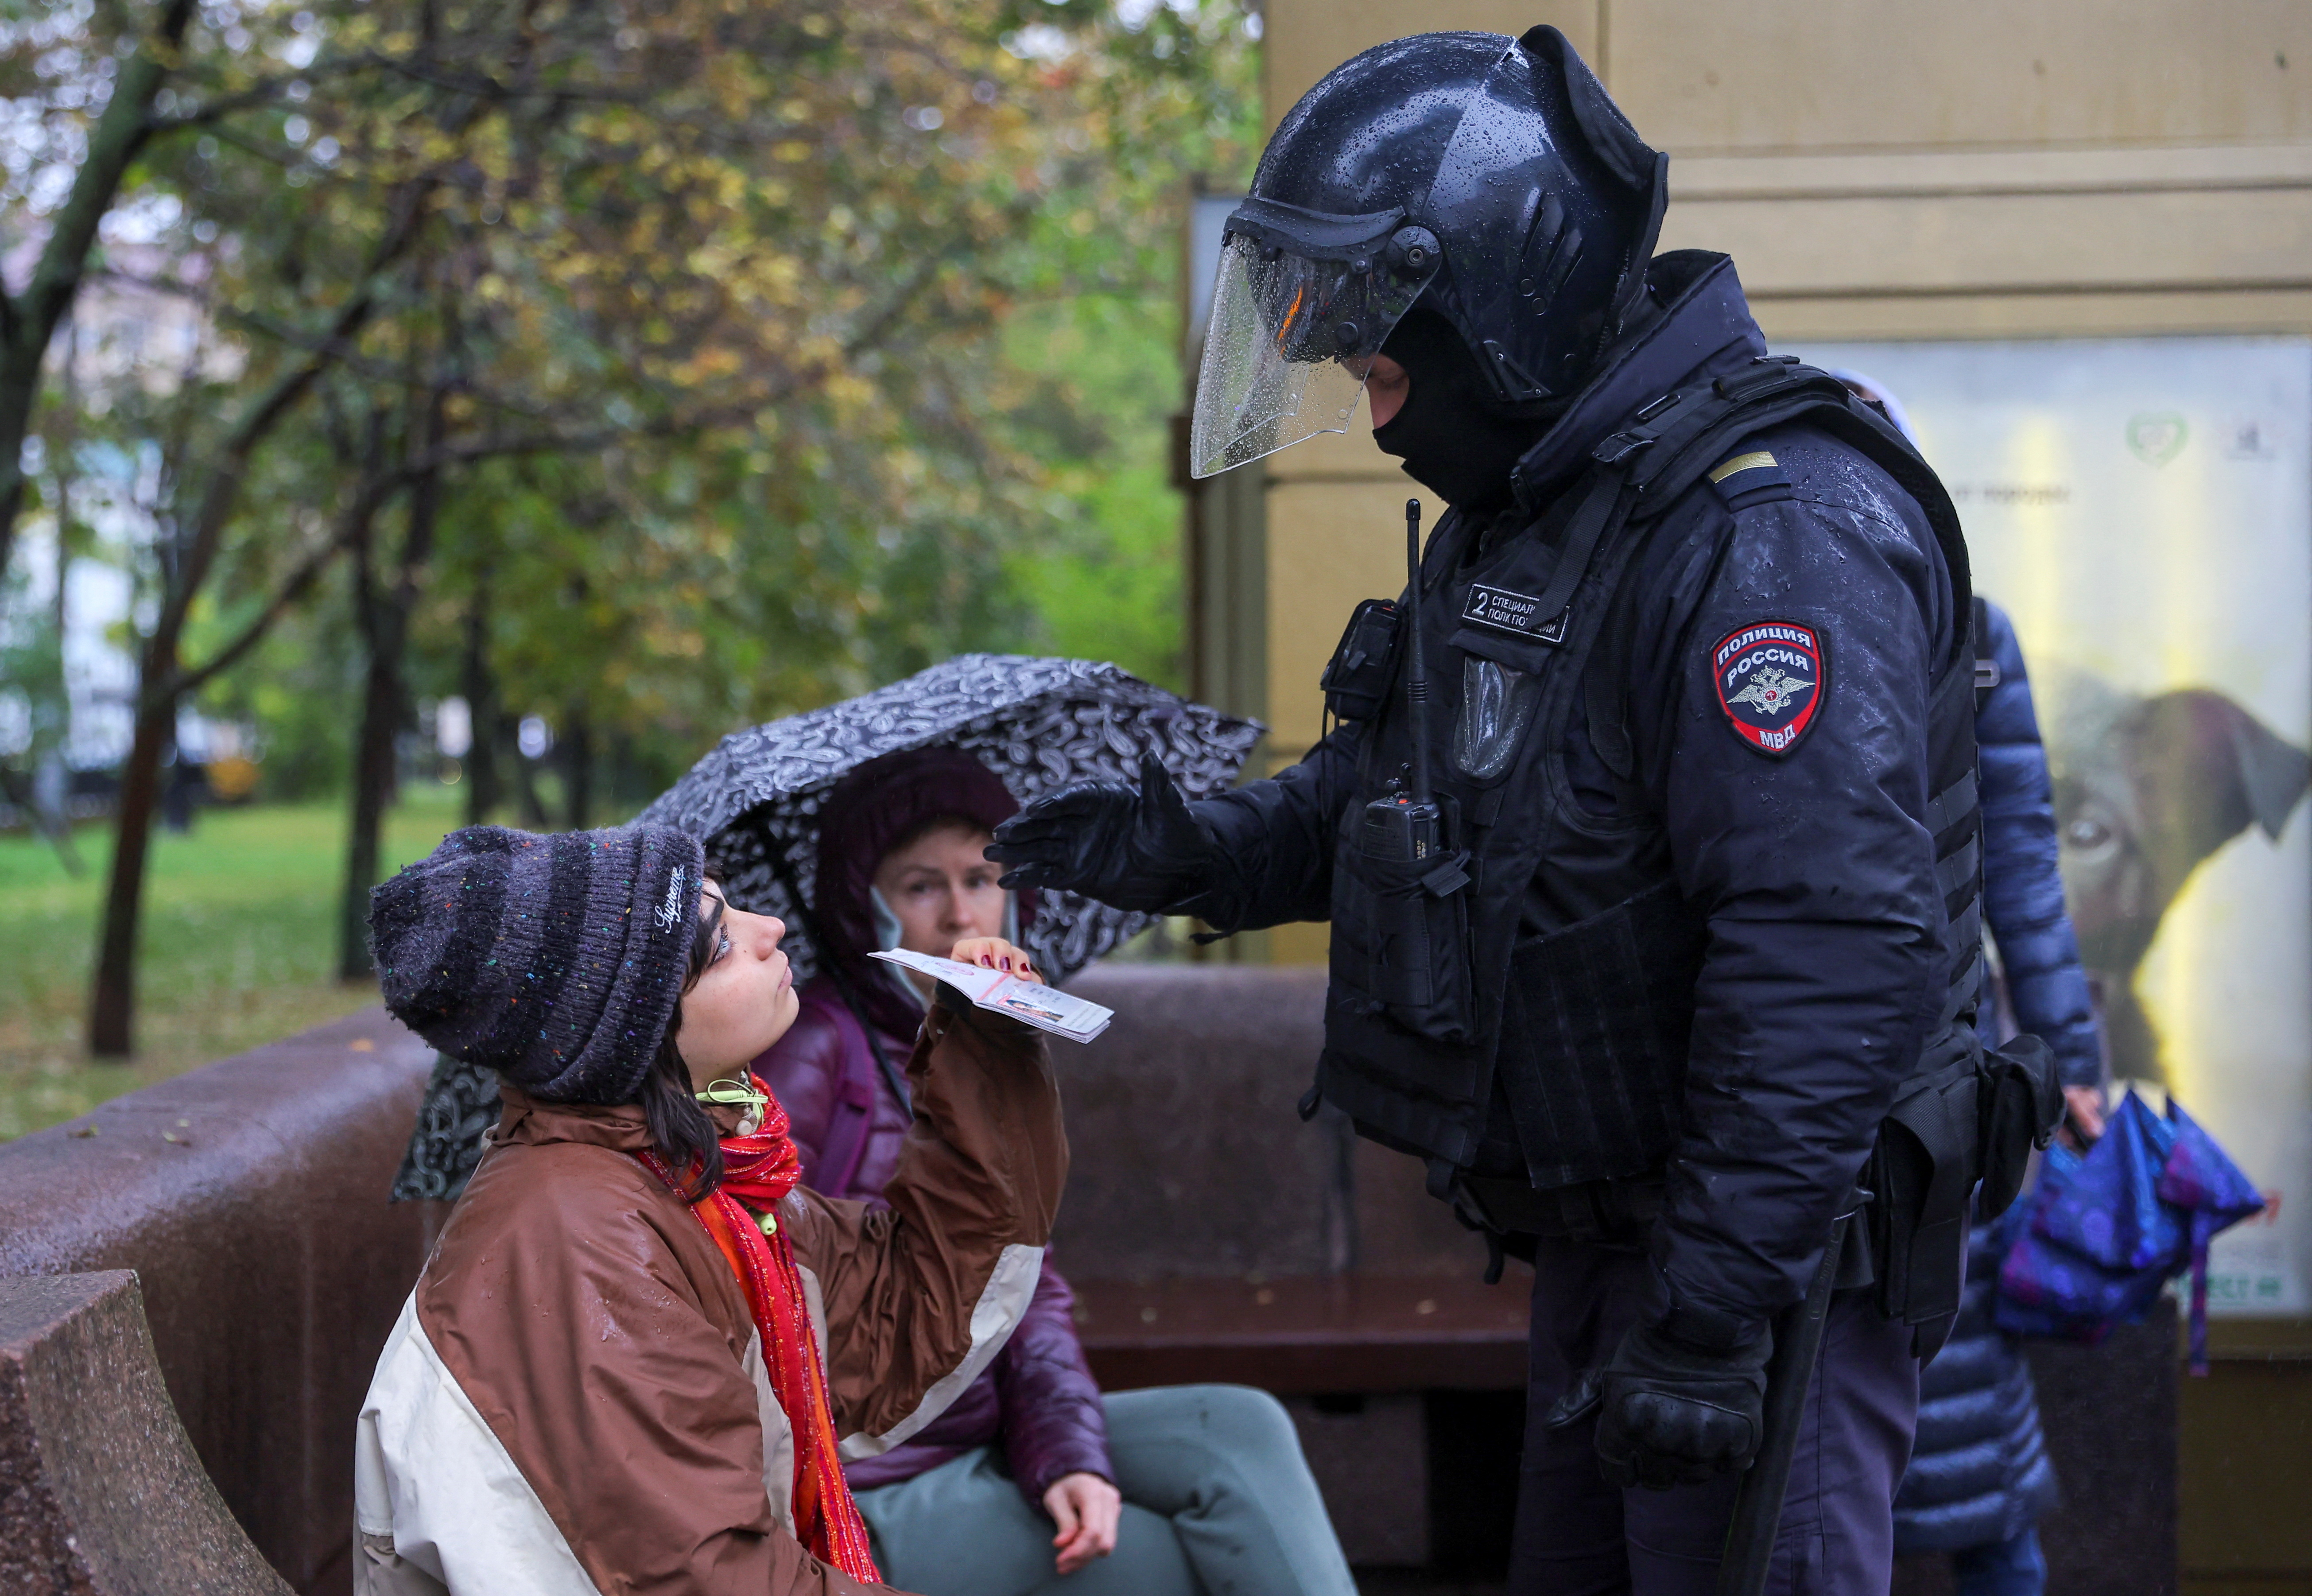 A Russian police officer checks a document during a rally in Moscow